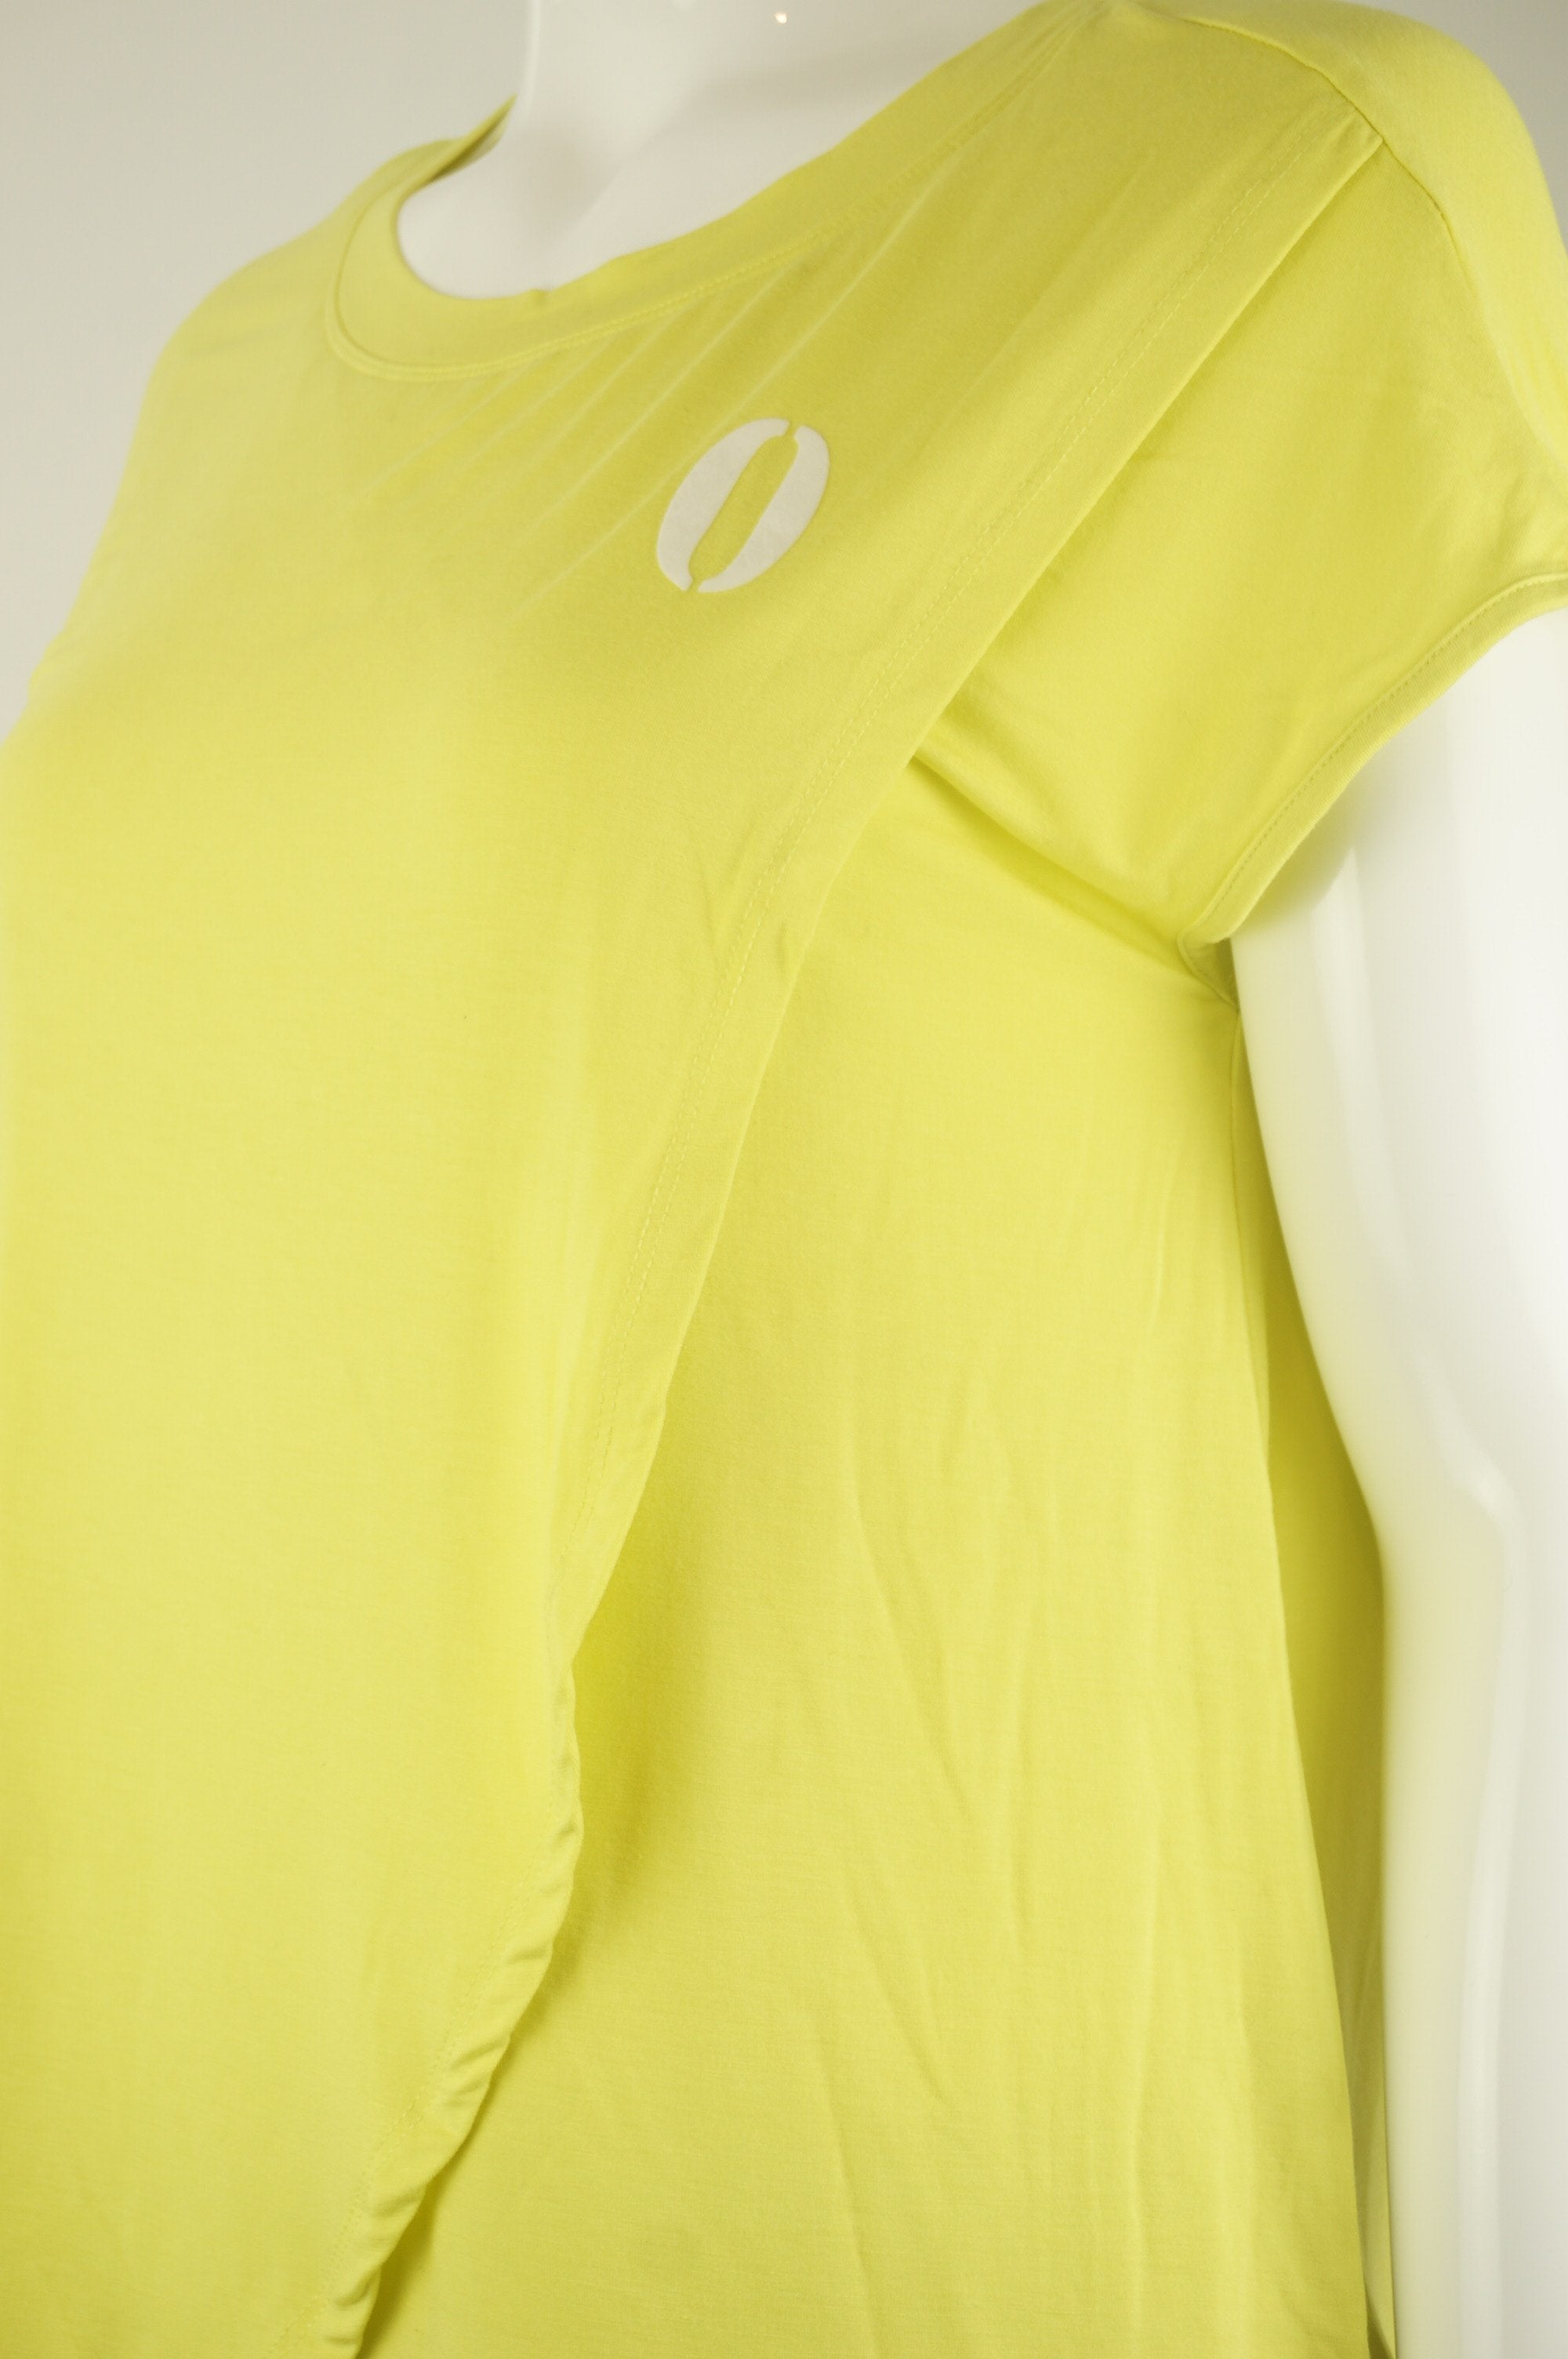 Octmami Super Comfy Nursing Top, Comfortable and stretchy top with access. Soft material that will hug the little one in with maximum comfort., Yellow, 92.4% Viscose, 7.6% Spandex, women's Mom & Baby, women's Yellow Mom & Baby, Octmami women's Mom & Baby, Maternity clothing, nursing top, comfortable nursing top for new mothers, new mother nursing top